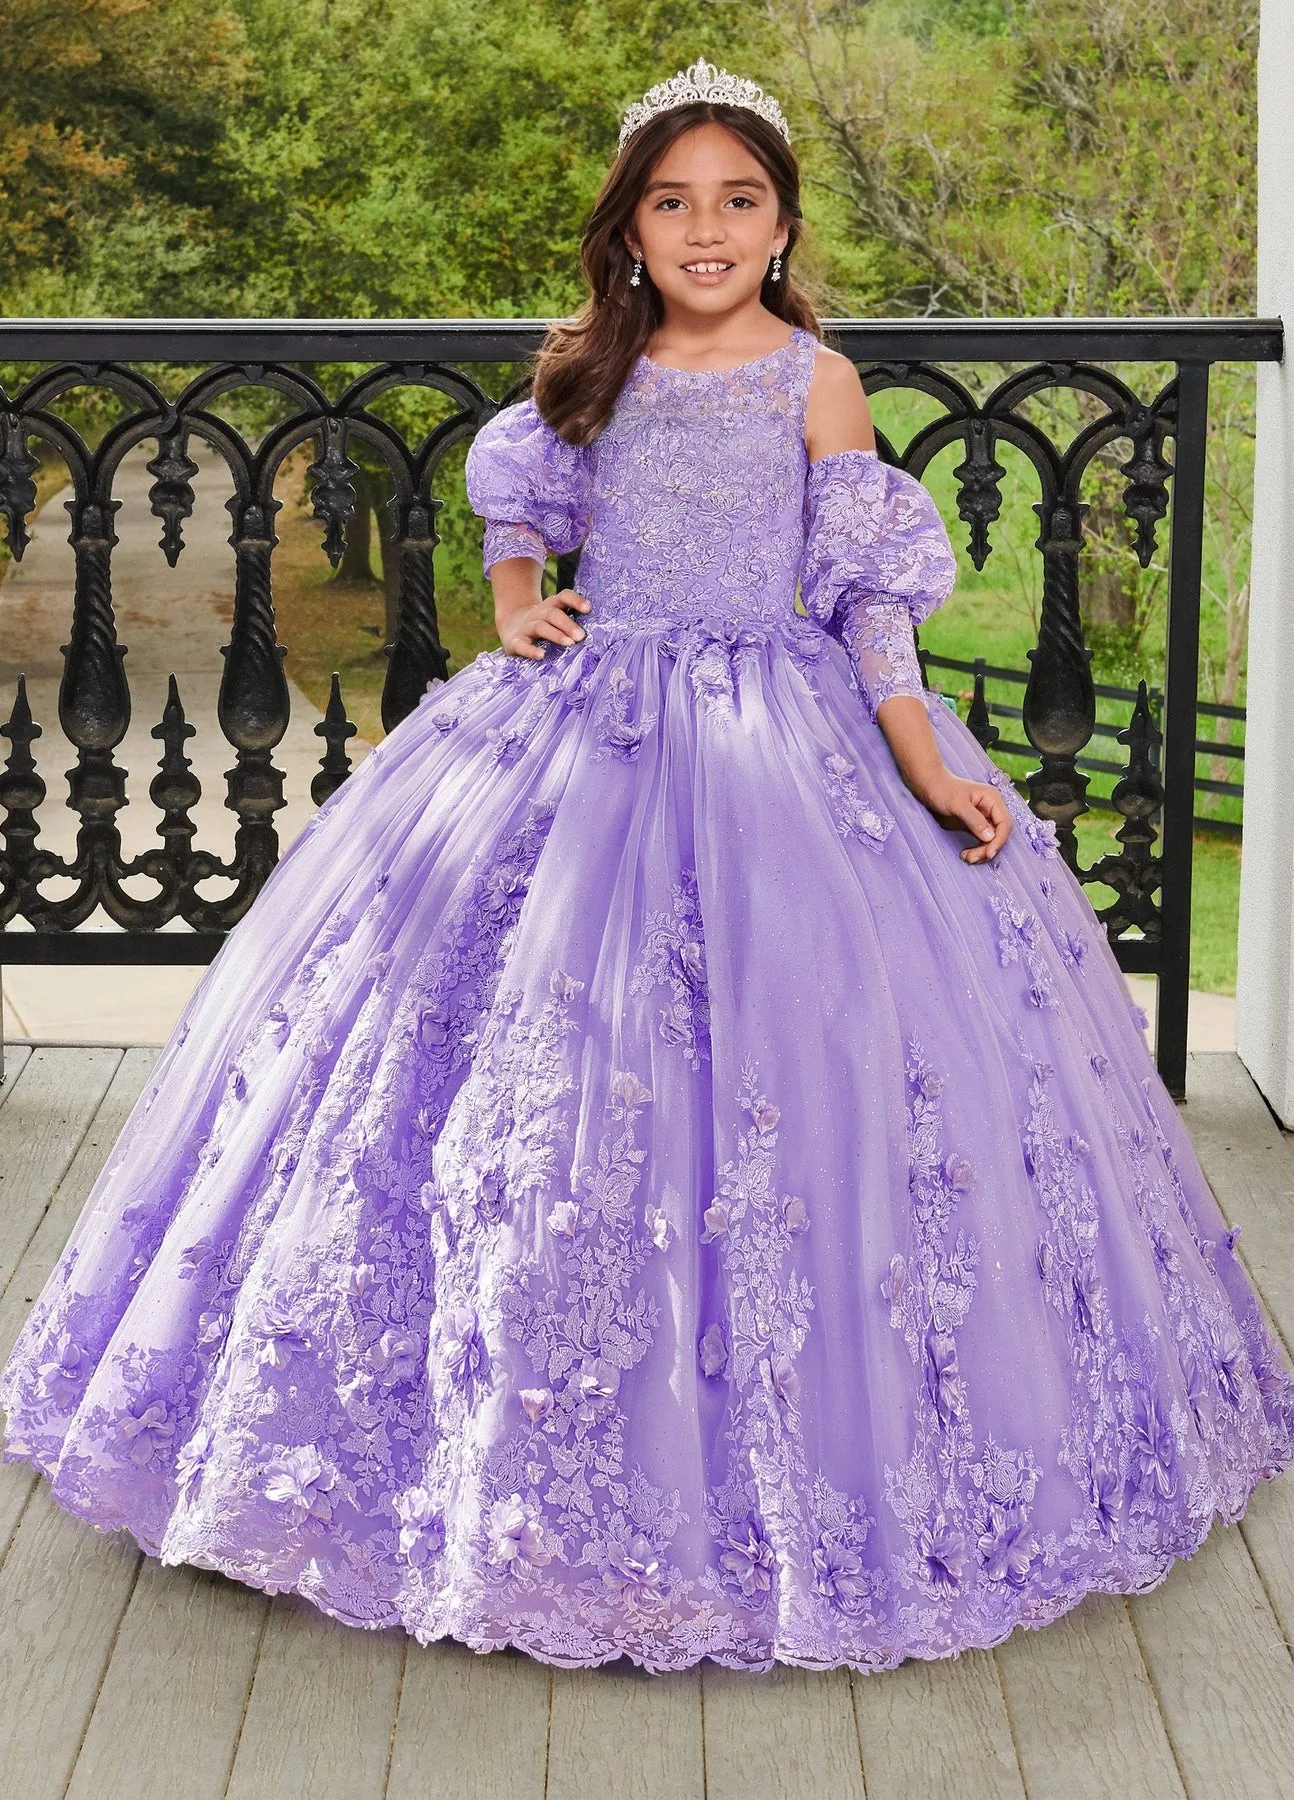 

Lavender Mini Quinceanera Dresses Ball Gown Tulle Appliques Floral Flower Girl Dresses For Weddings Pageant Dresses Kids Baby